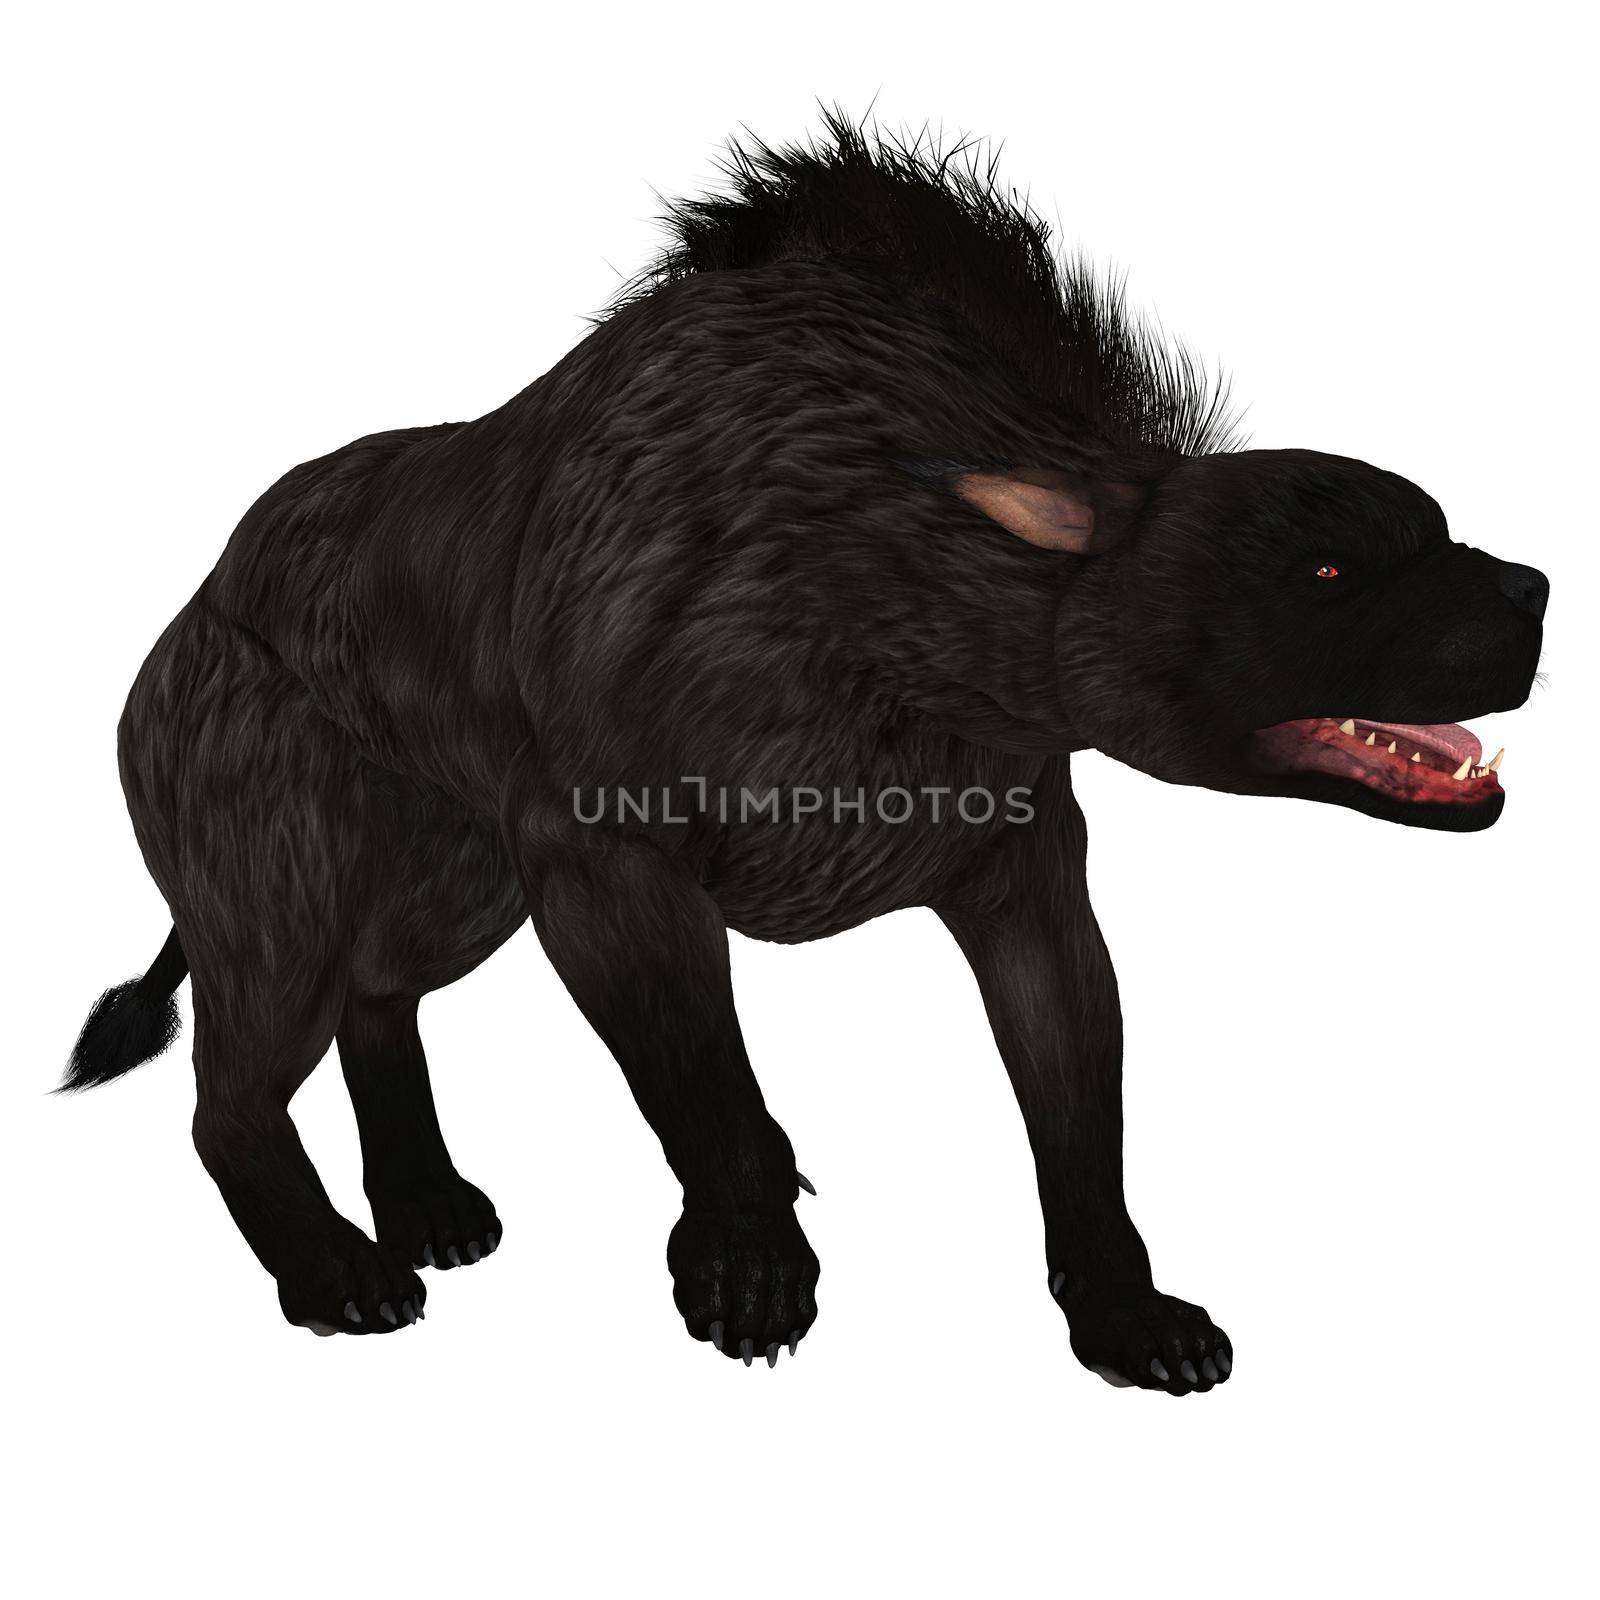 The Warhound also called Hellhound is the mythical dog that guards the gates of Hell with glowing red eyes.